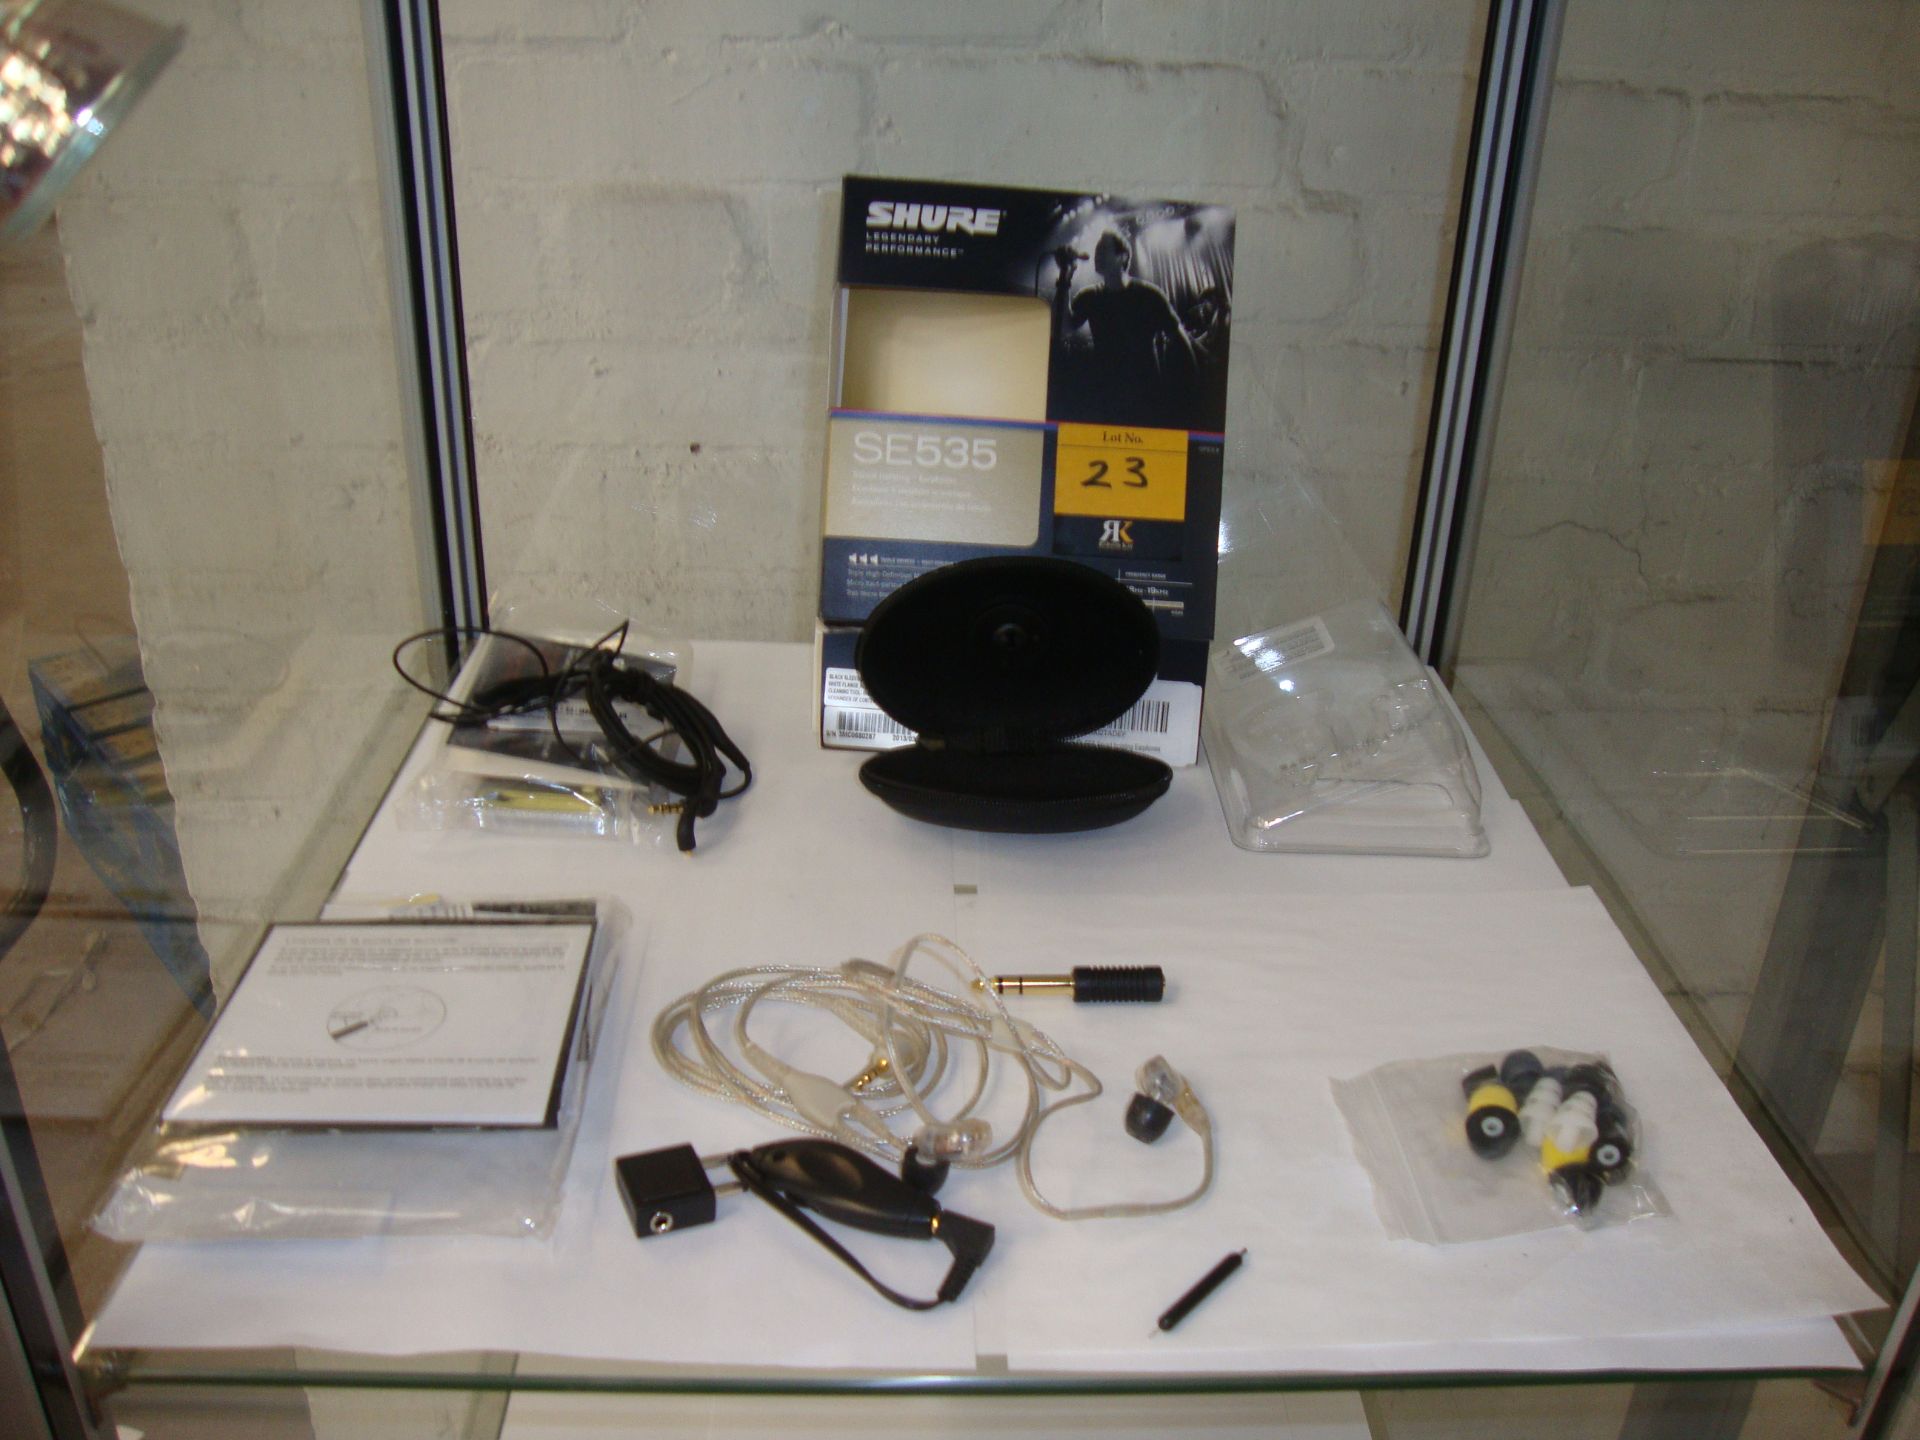 Shure model SE535 sound isolating earphones. This lot includes all of the ancillary items detailed